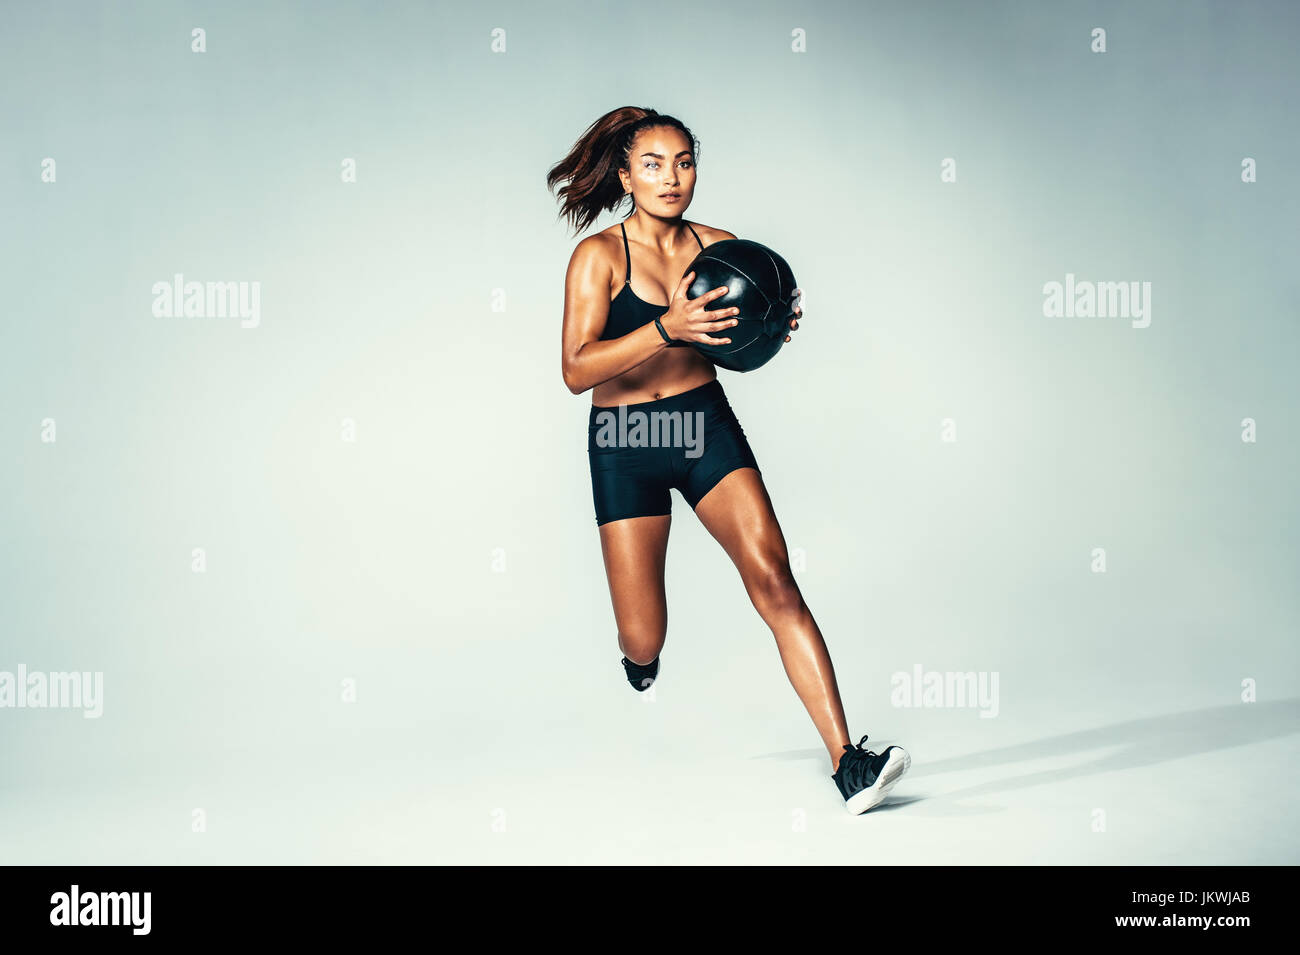 Studio shot of fit young woman running with medicine ball. Female model with muscular body working out with fitness ball over grey background. Stock Photo